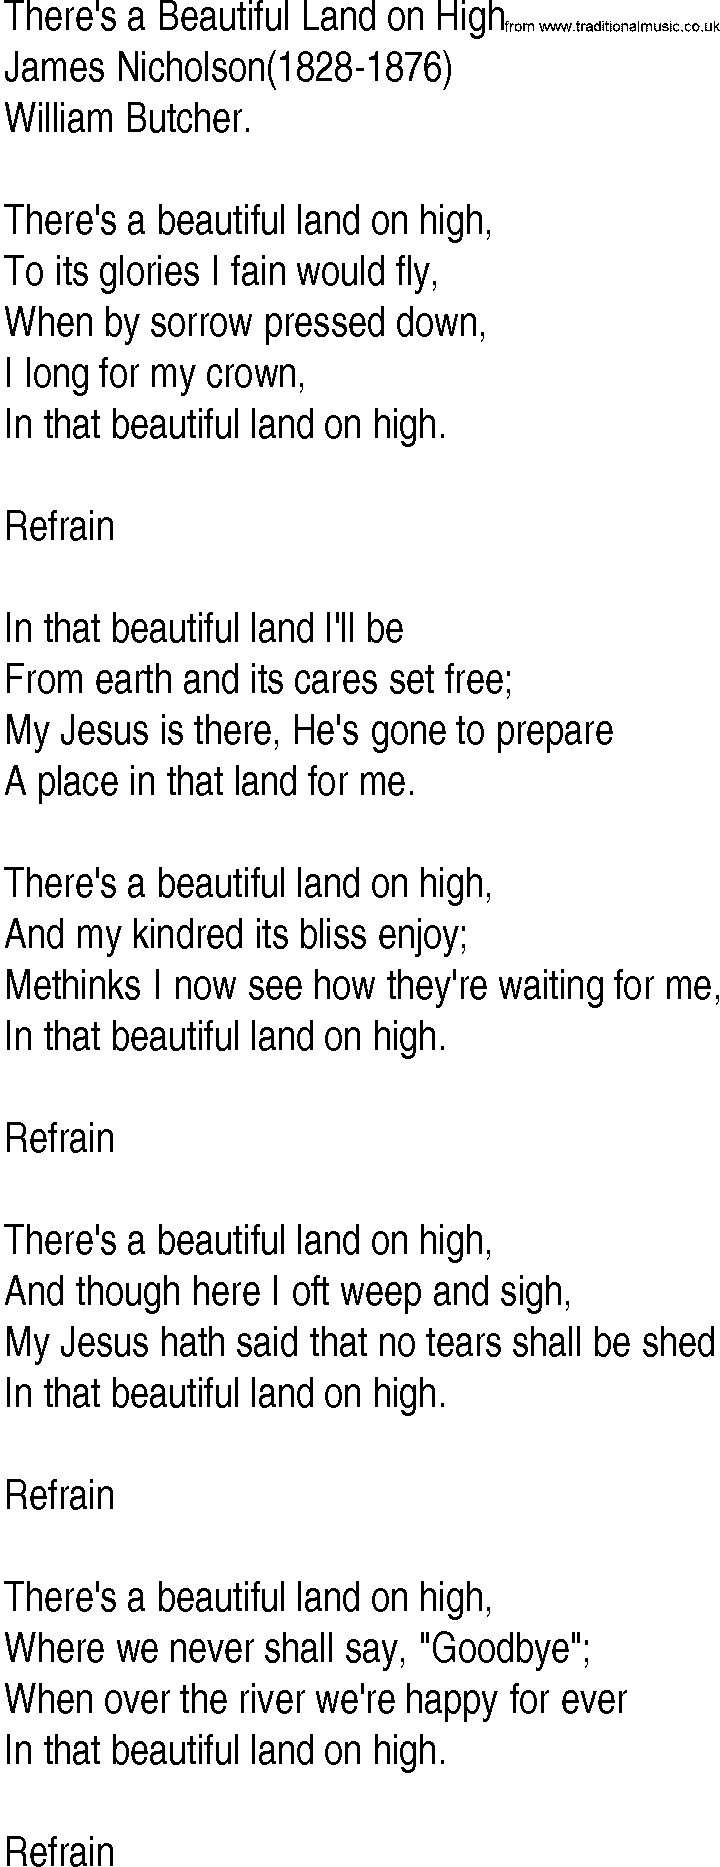 Hymn and Gospel Song: There's a Beautiful Land on High by James Nicholson lyrics